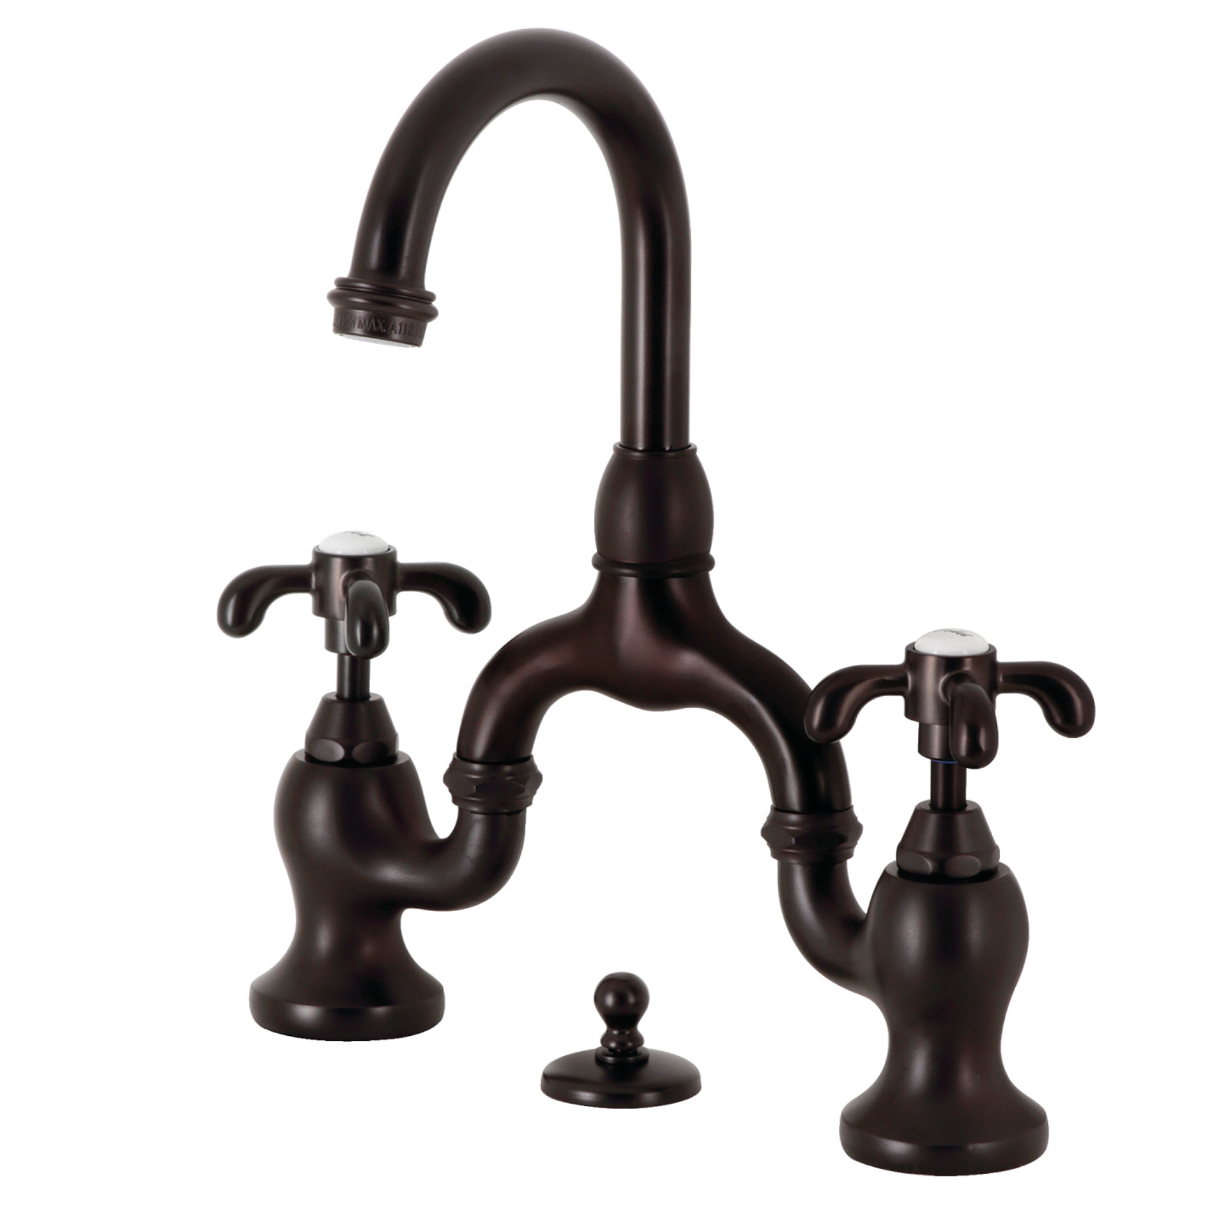 French Country Bridge Bathroom Faucet with Spoke Handles